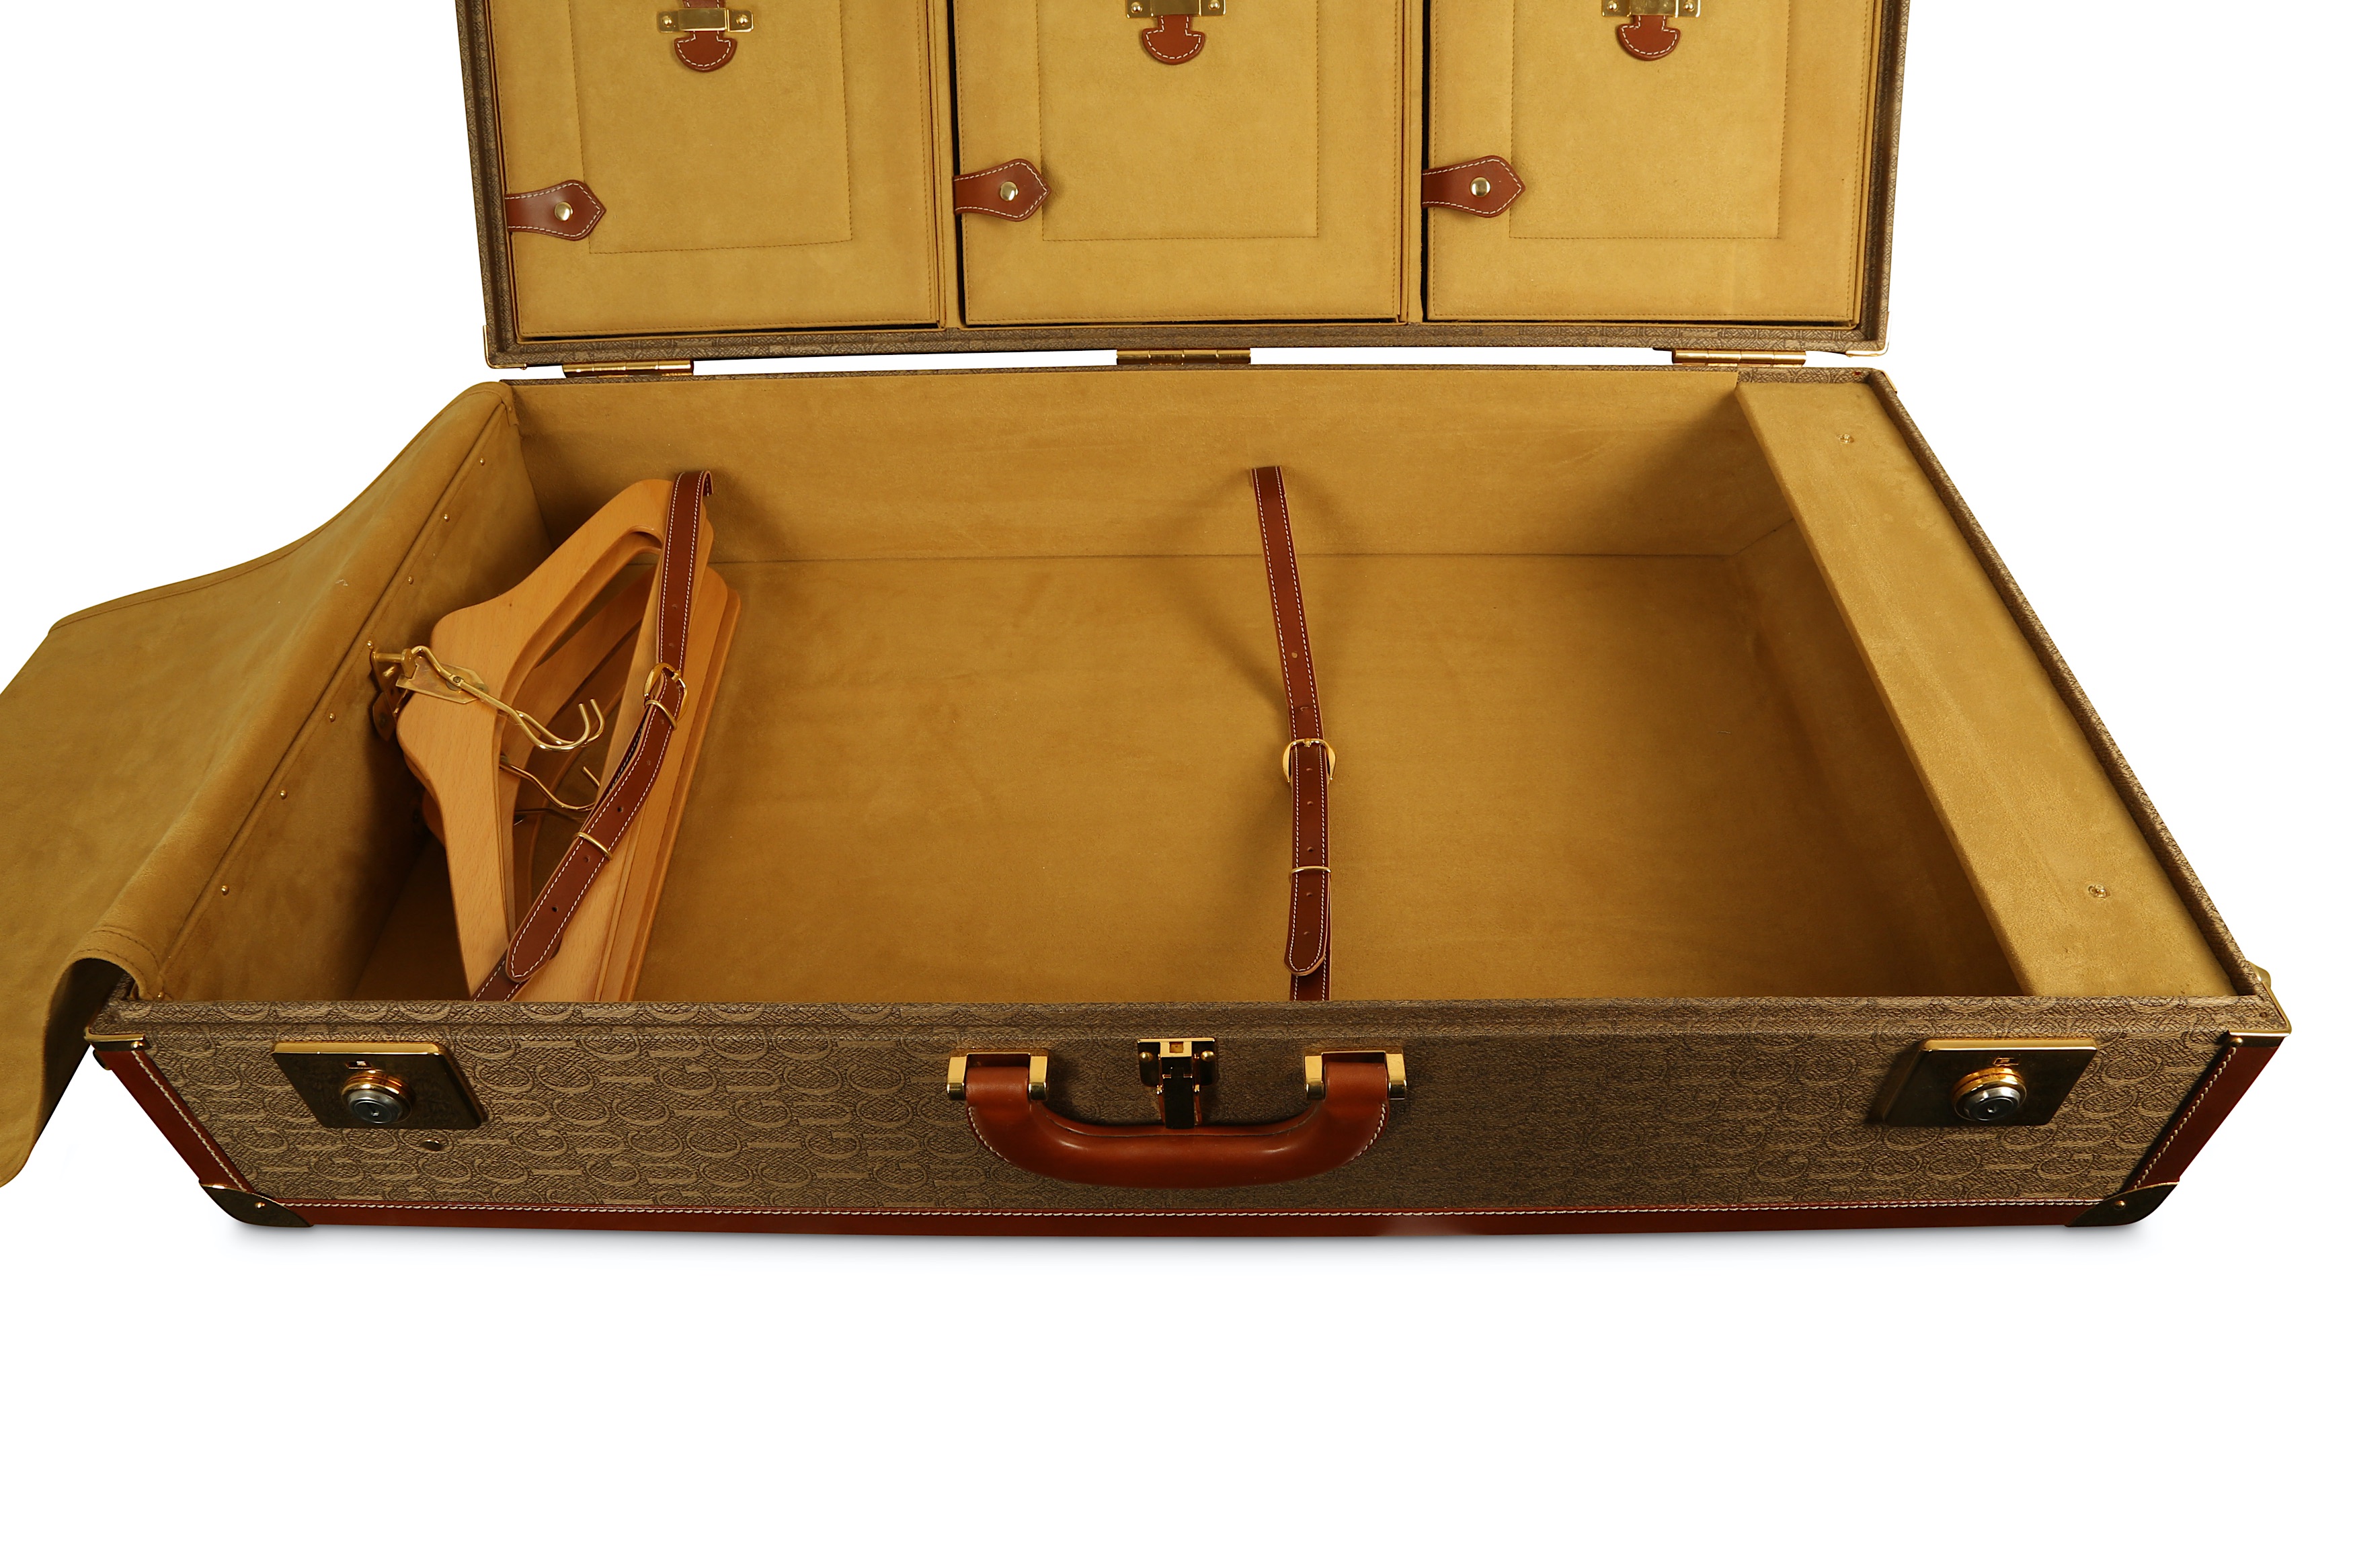 A GUCCI VINTAGE ROLLING STEAMER TRUNK - Image 8 of 14